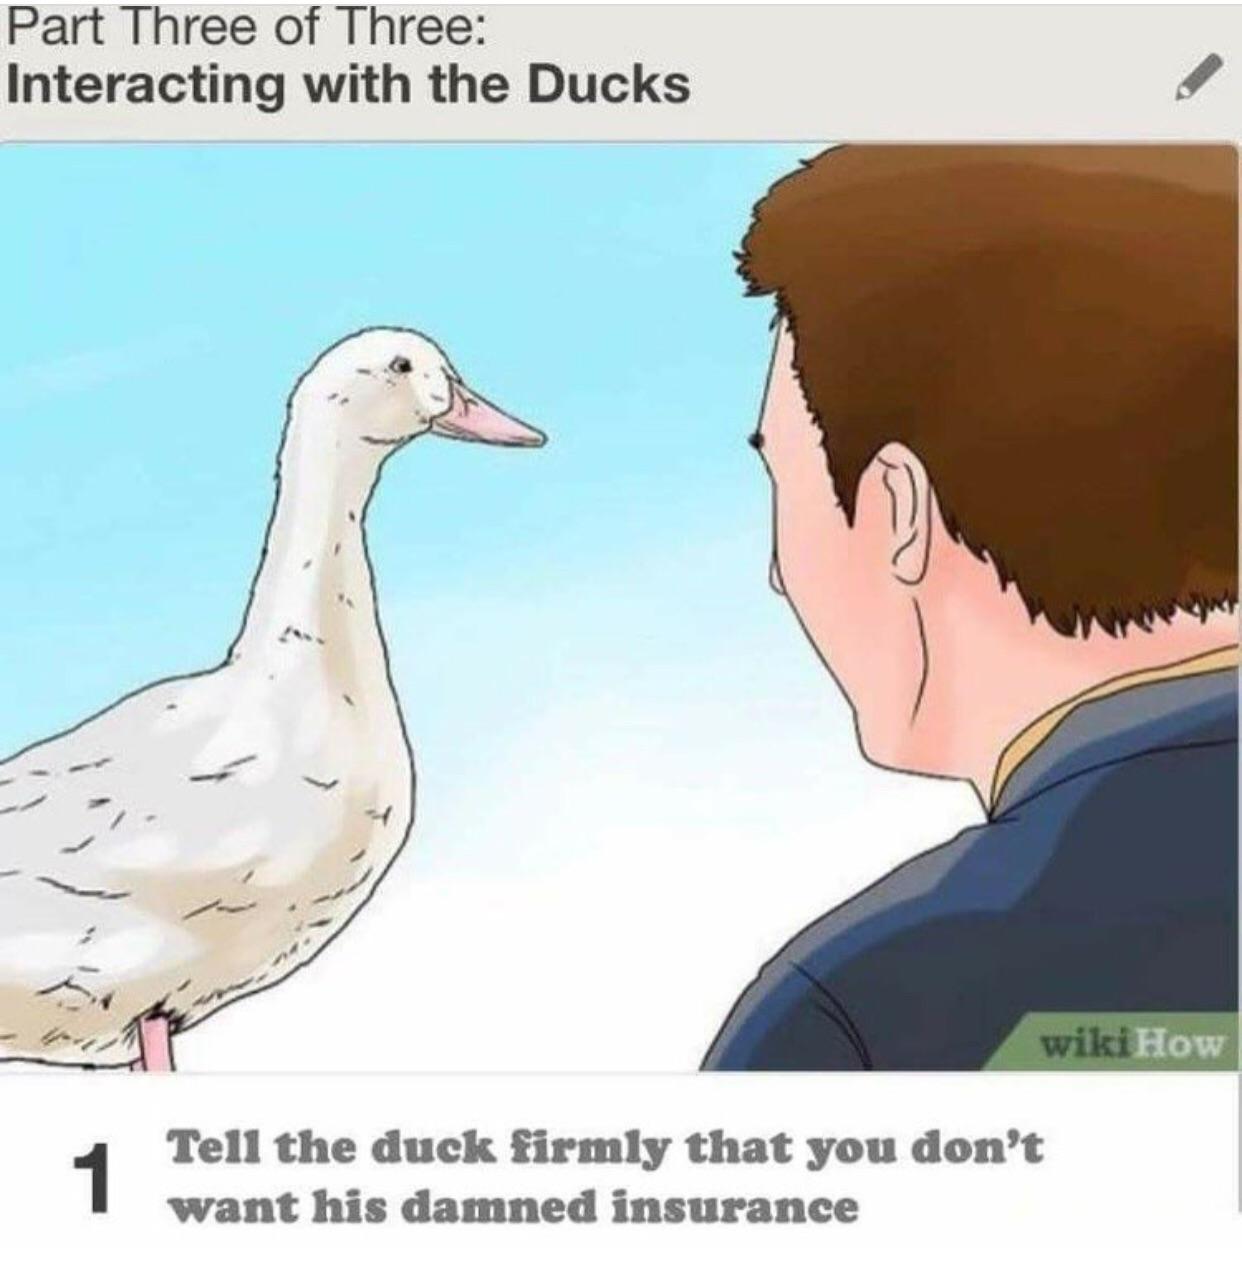 Interacting with ducks: Step 2